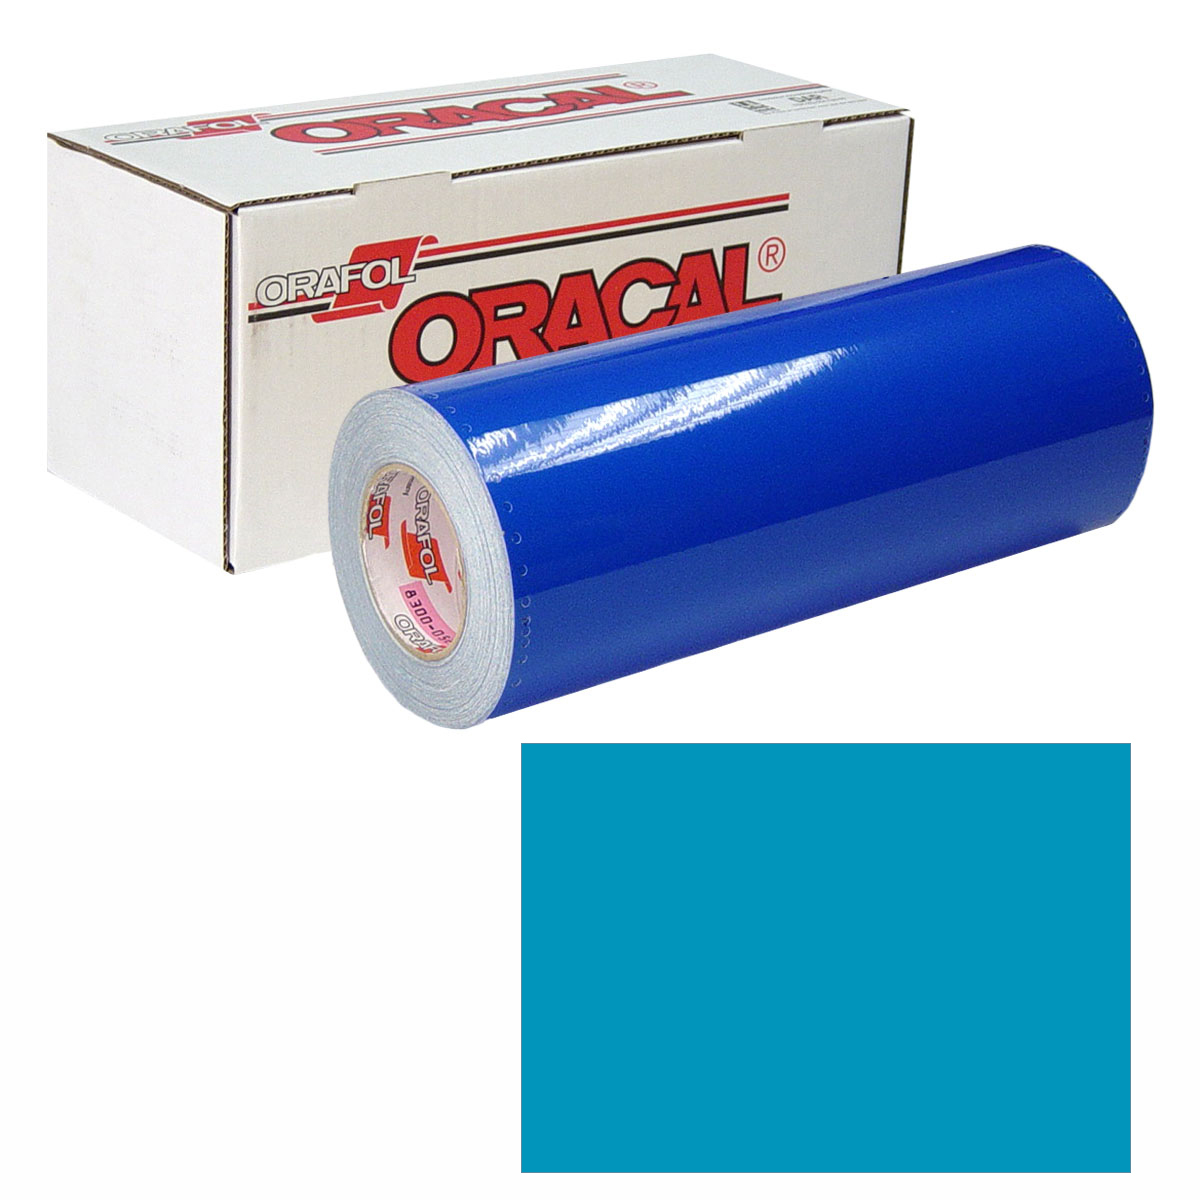 ORACAL 631 15in X 50yd 174 Teal